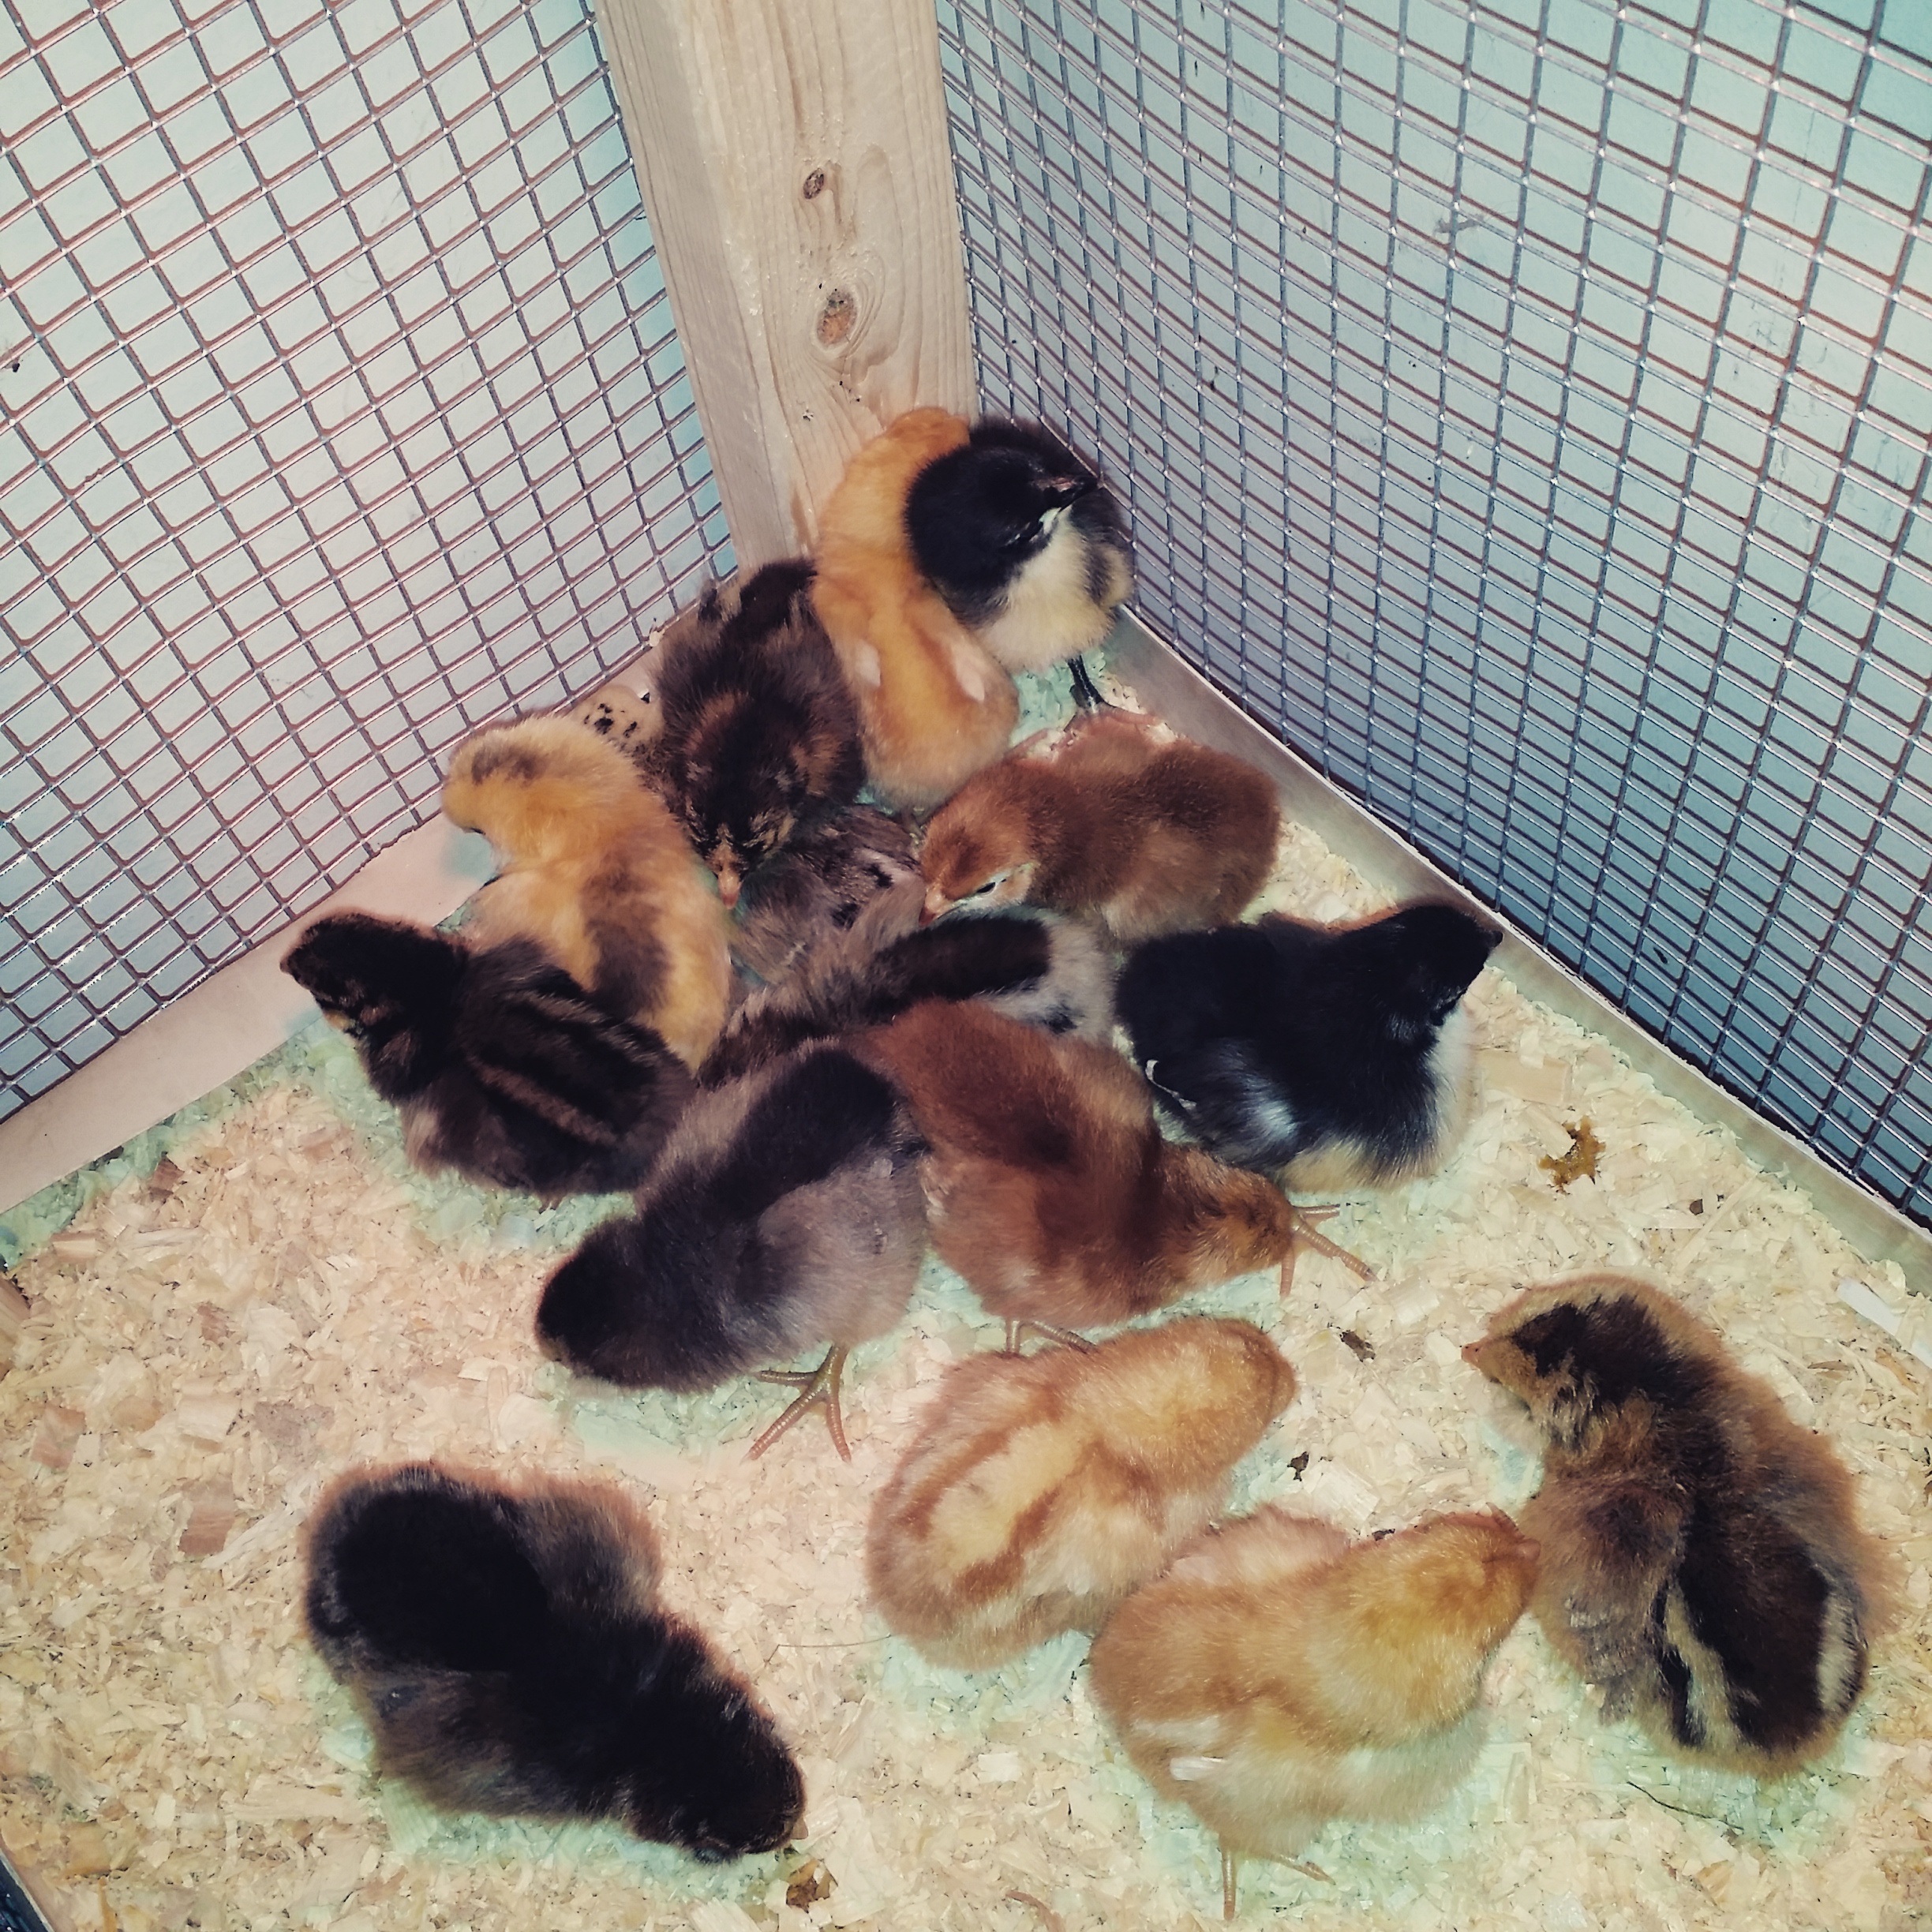 Our newest batch of chicks for 2016.